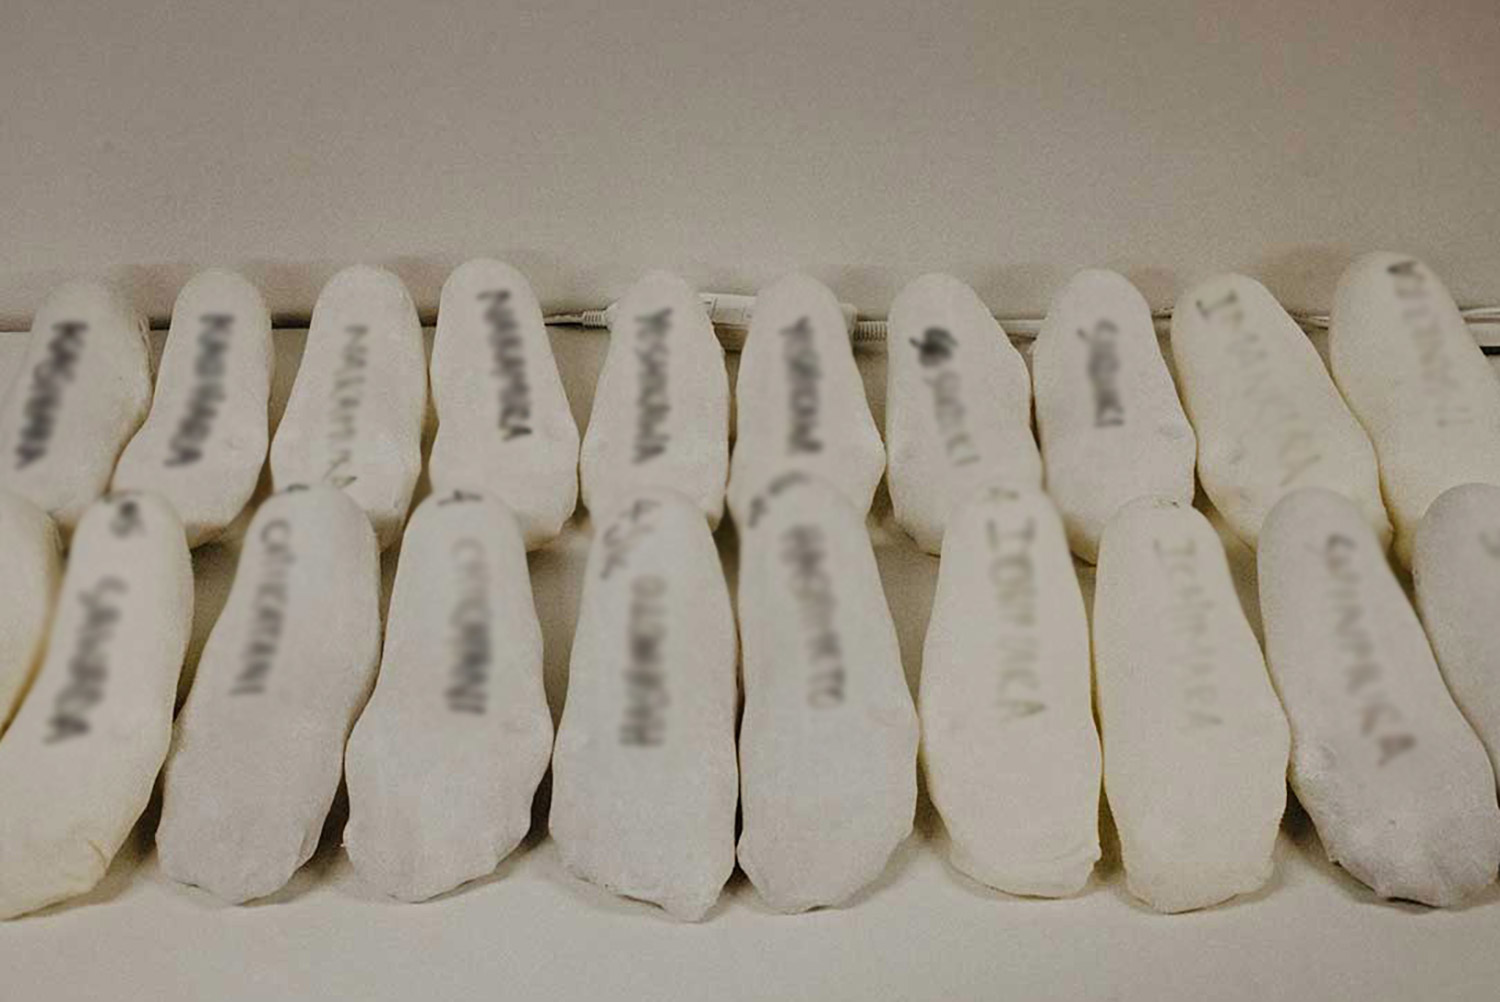 Many foot orthotic casts of Japan cyclist team lined up on a table